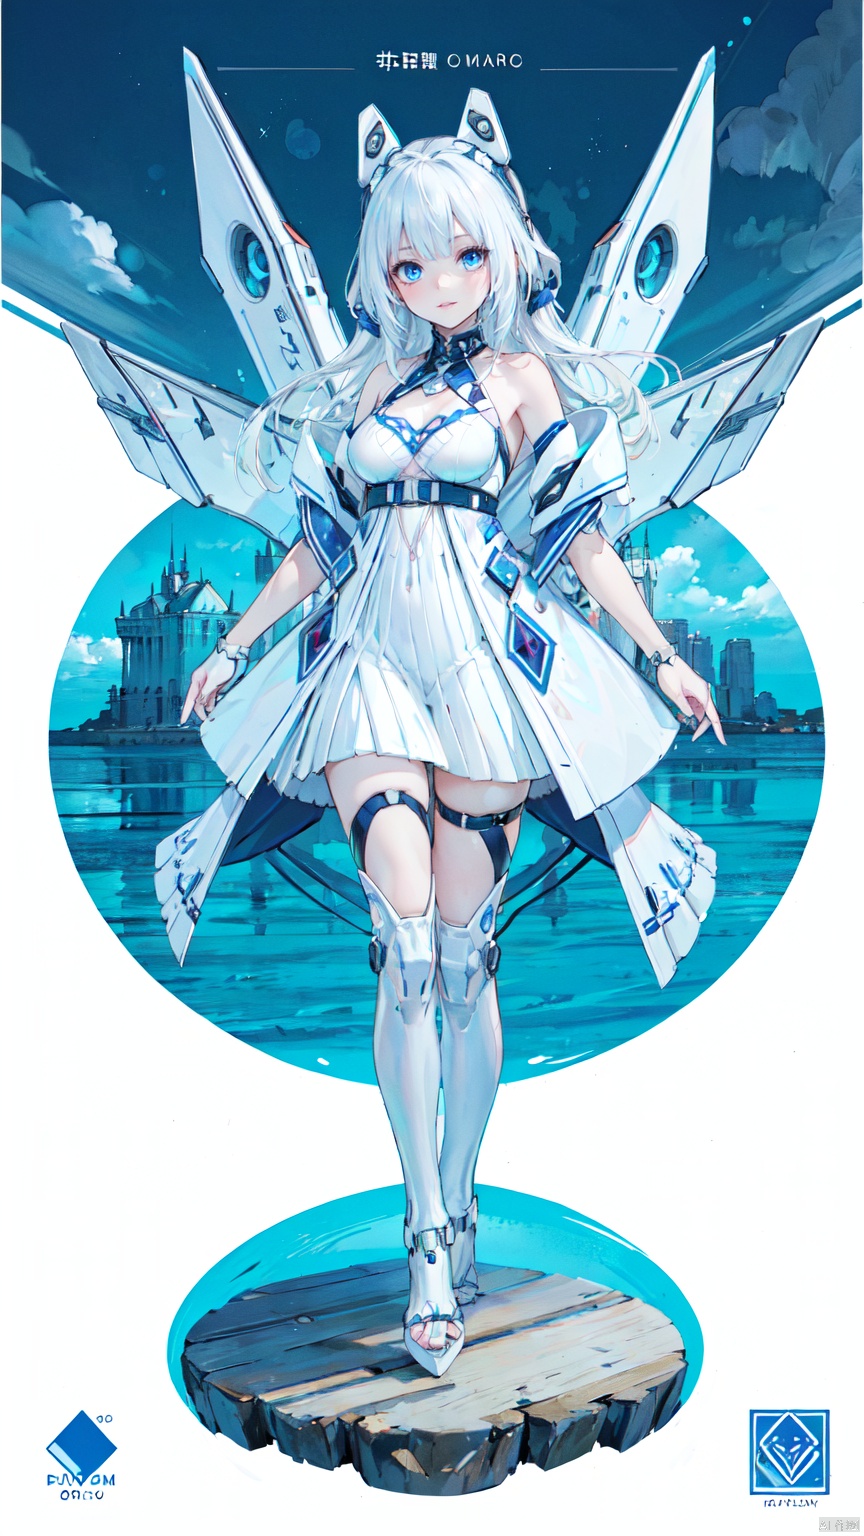  simple_blue_background, golden and white theme, Sense of coordination, sense of order, mathematics beauty, (((cover design))), (((((cover art))))), ((trim)), album_art, official art, (Master's work), full body, ( closeup, 1girl,solo:1.2), 
white dress,tianqi,white mechanical wings,blue eyes,long hair,white hair,breasts,bare shoulders,animalears,boots,bangs,
cloud, sky, summer, water patterns, white geometry, colorful geometry, reflection, crystal_art, pattern_design, creative, Mystery pattern, colorful crystal decorate, blue crystal, (architectural art), ((geometric art)), pattern design, creative, shine, dream, 
swimming in ocean, happy summer, beach, sandals, waves, 
------, 
Low saturation, grand masterpiece, Perfect composition, film light, light art, beautiful face, (masterpiece), Anime